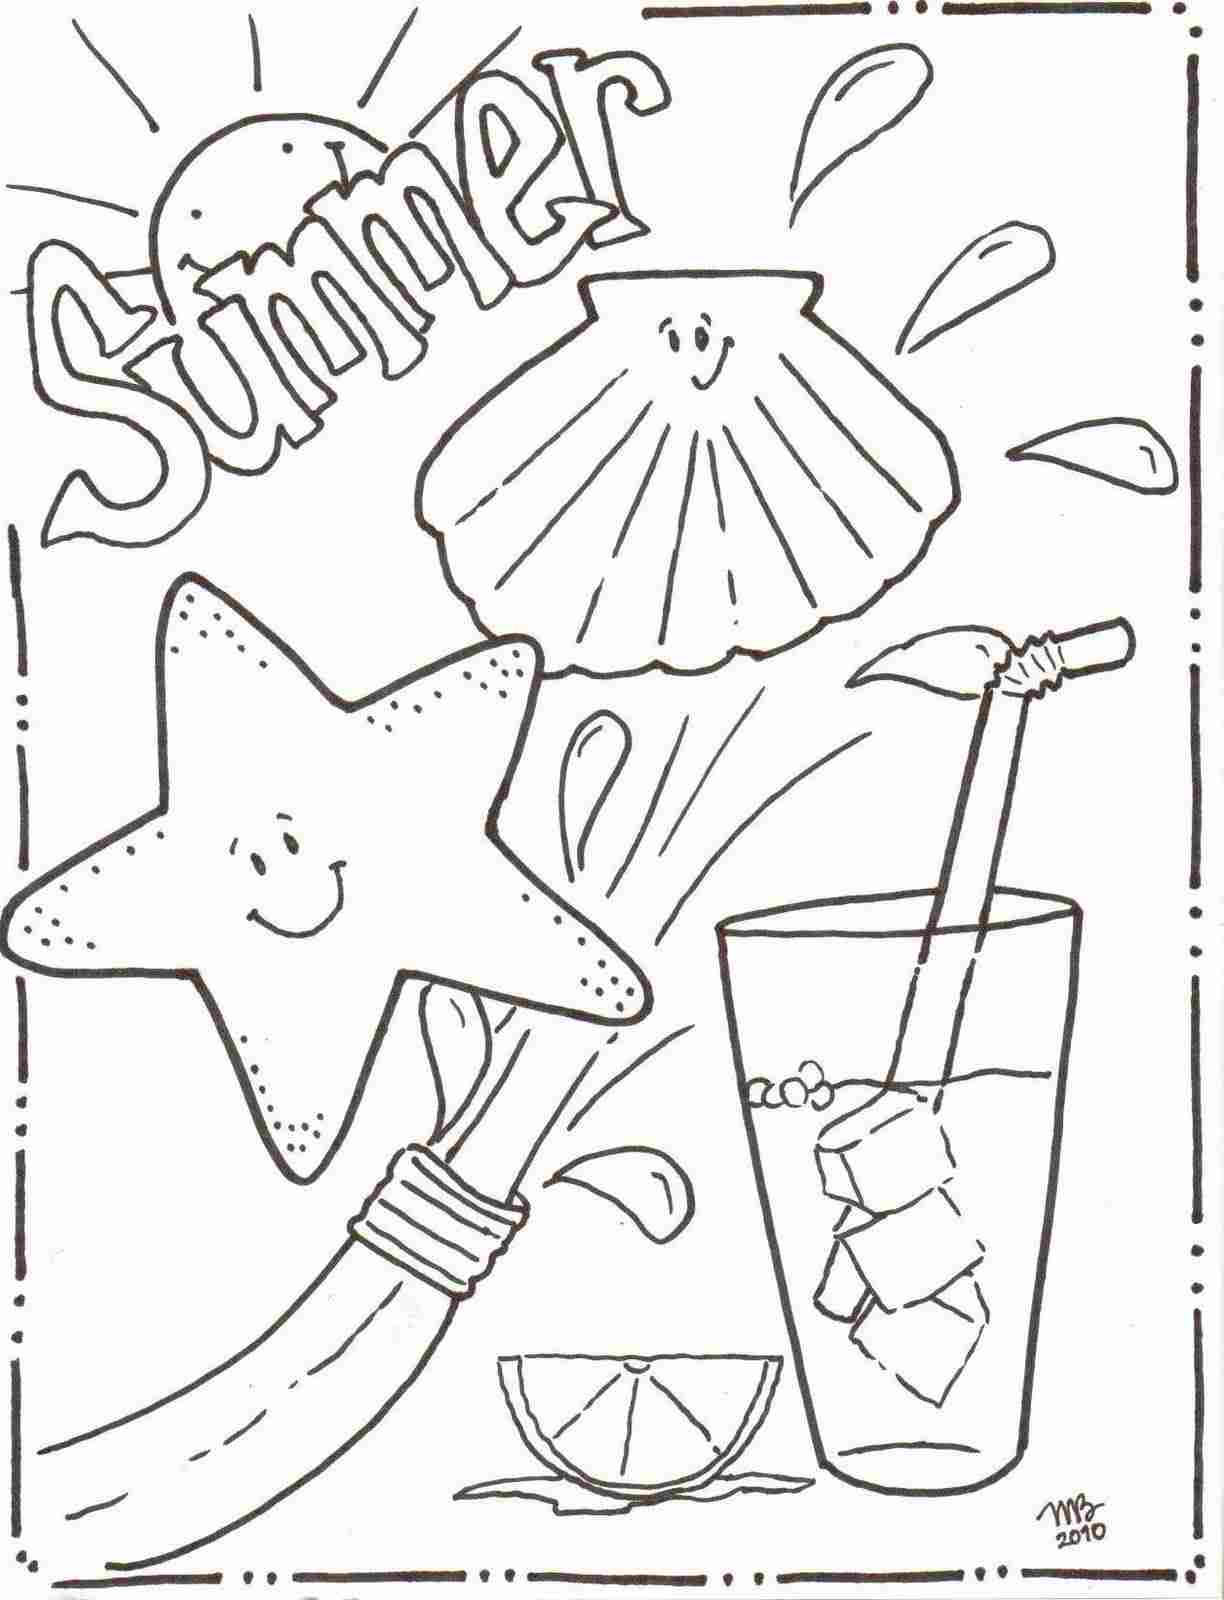 coloring-page-SUMMER